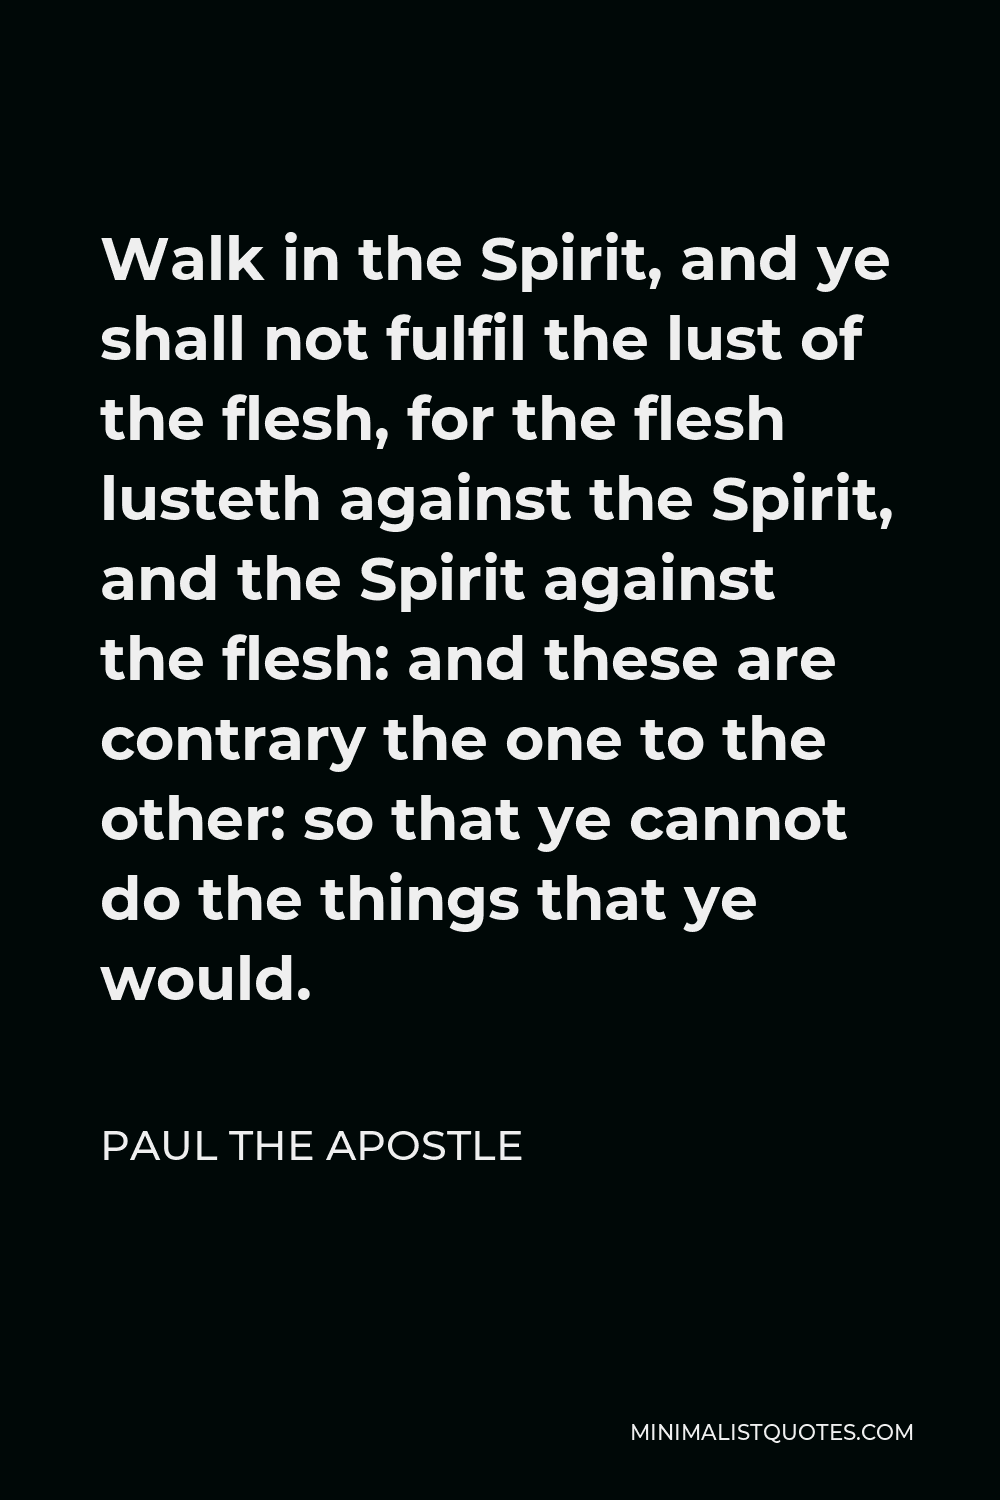 Paul the Apostle Quote - Walk in the Spirit, and ye shall not fulfil the lust of the flesh, for the flesh lusteth against the Spirit, and the Spirit against the flesh: and these are contrary the one to the other: so that ye cannot do the things that ye would.